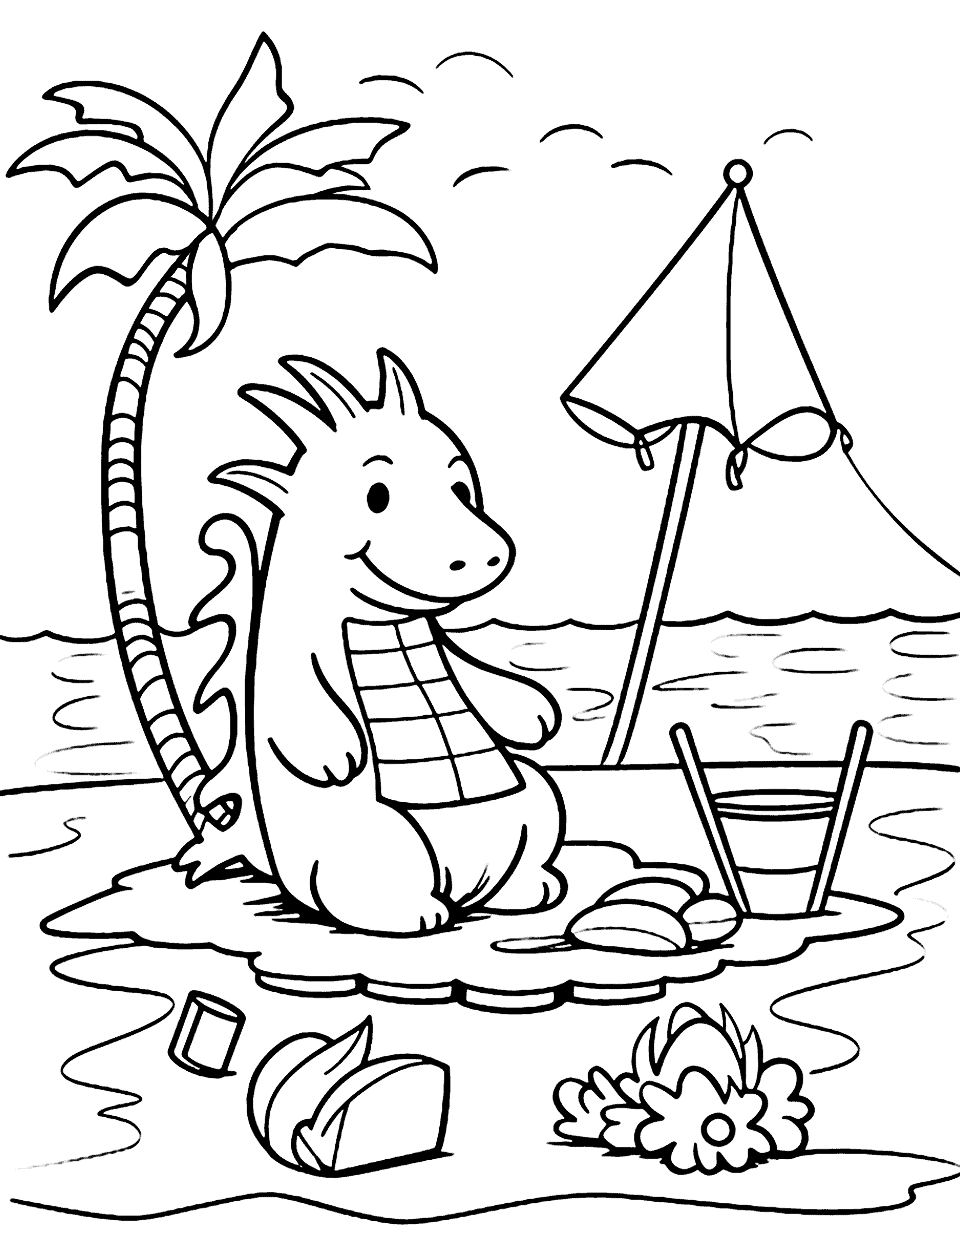 Dragon's Summer Barbecue Coloring Page - A friendly dragon hosting a barbecue, roasting marshmallows over its fiery breath.